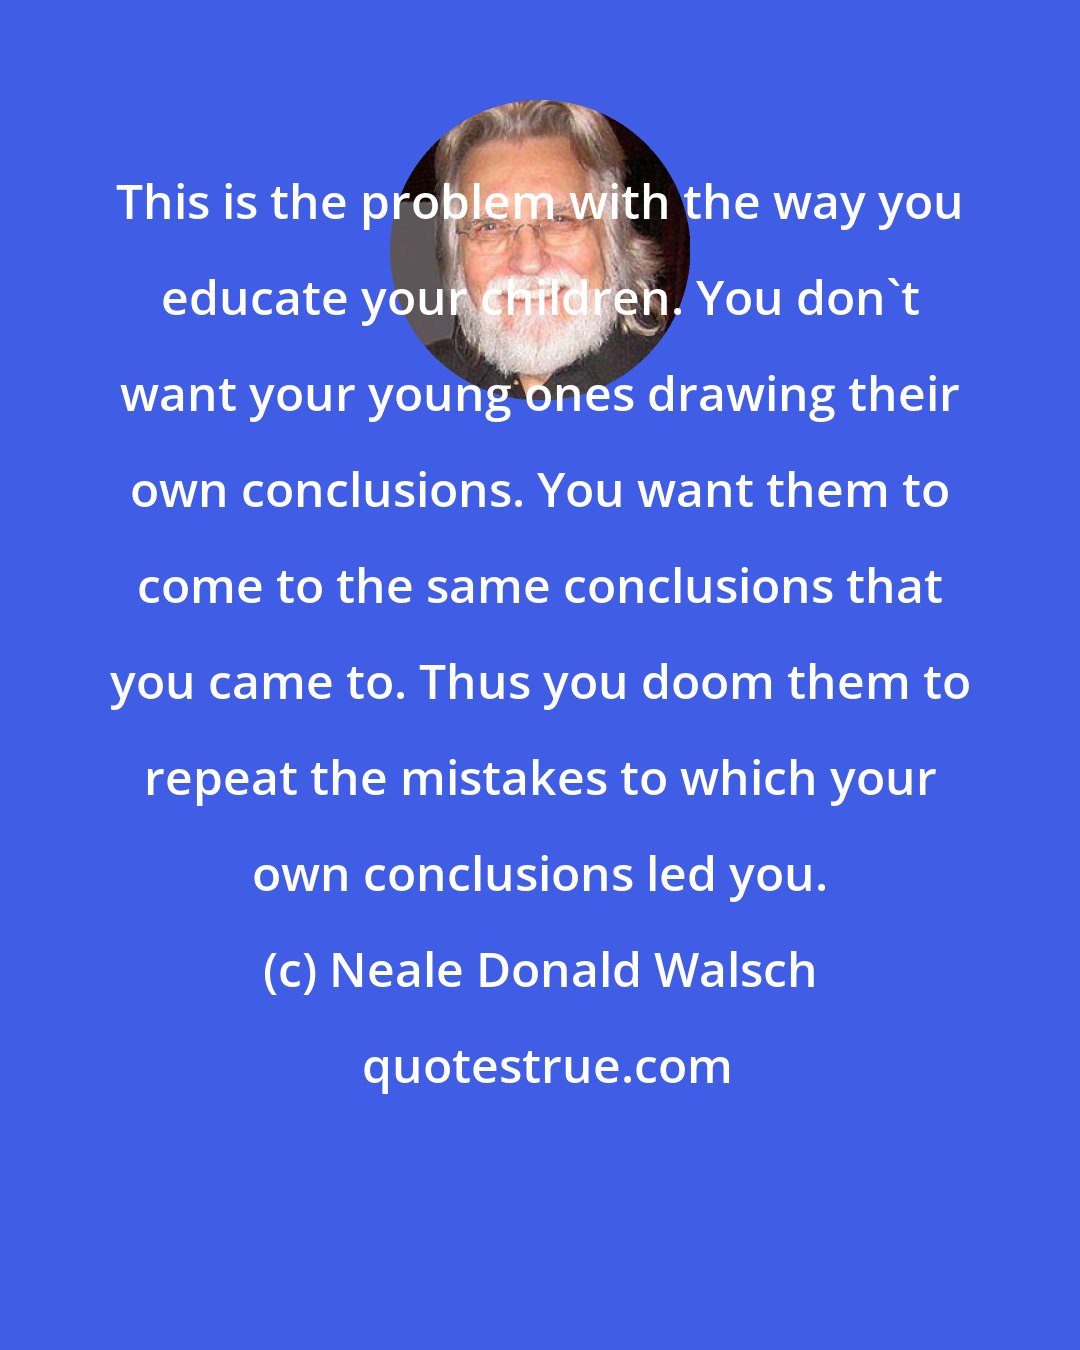 Neale Donald Walsch: This is the problem with the way you educate your children. You don't want your young ones drawing their own conclusions. You want them to come to the same conclusions that you came to. Thus you doom them to repeat the mistakes to which your own conclusions led you.